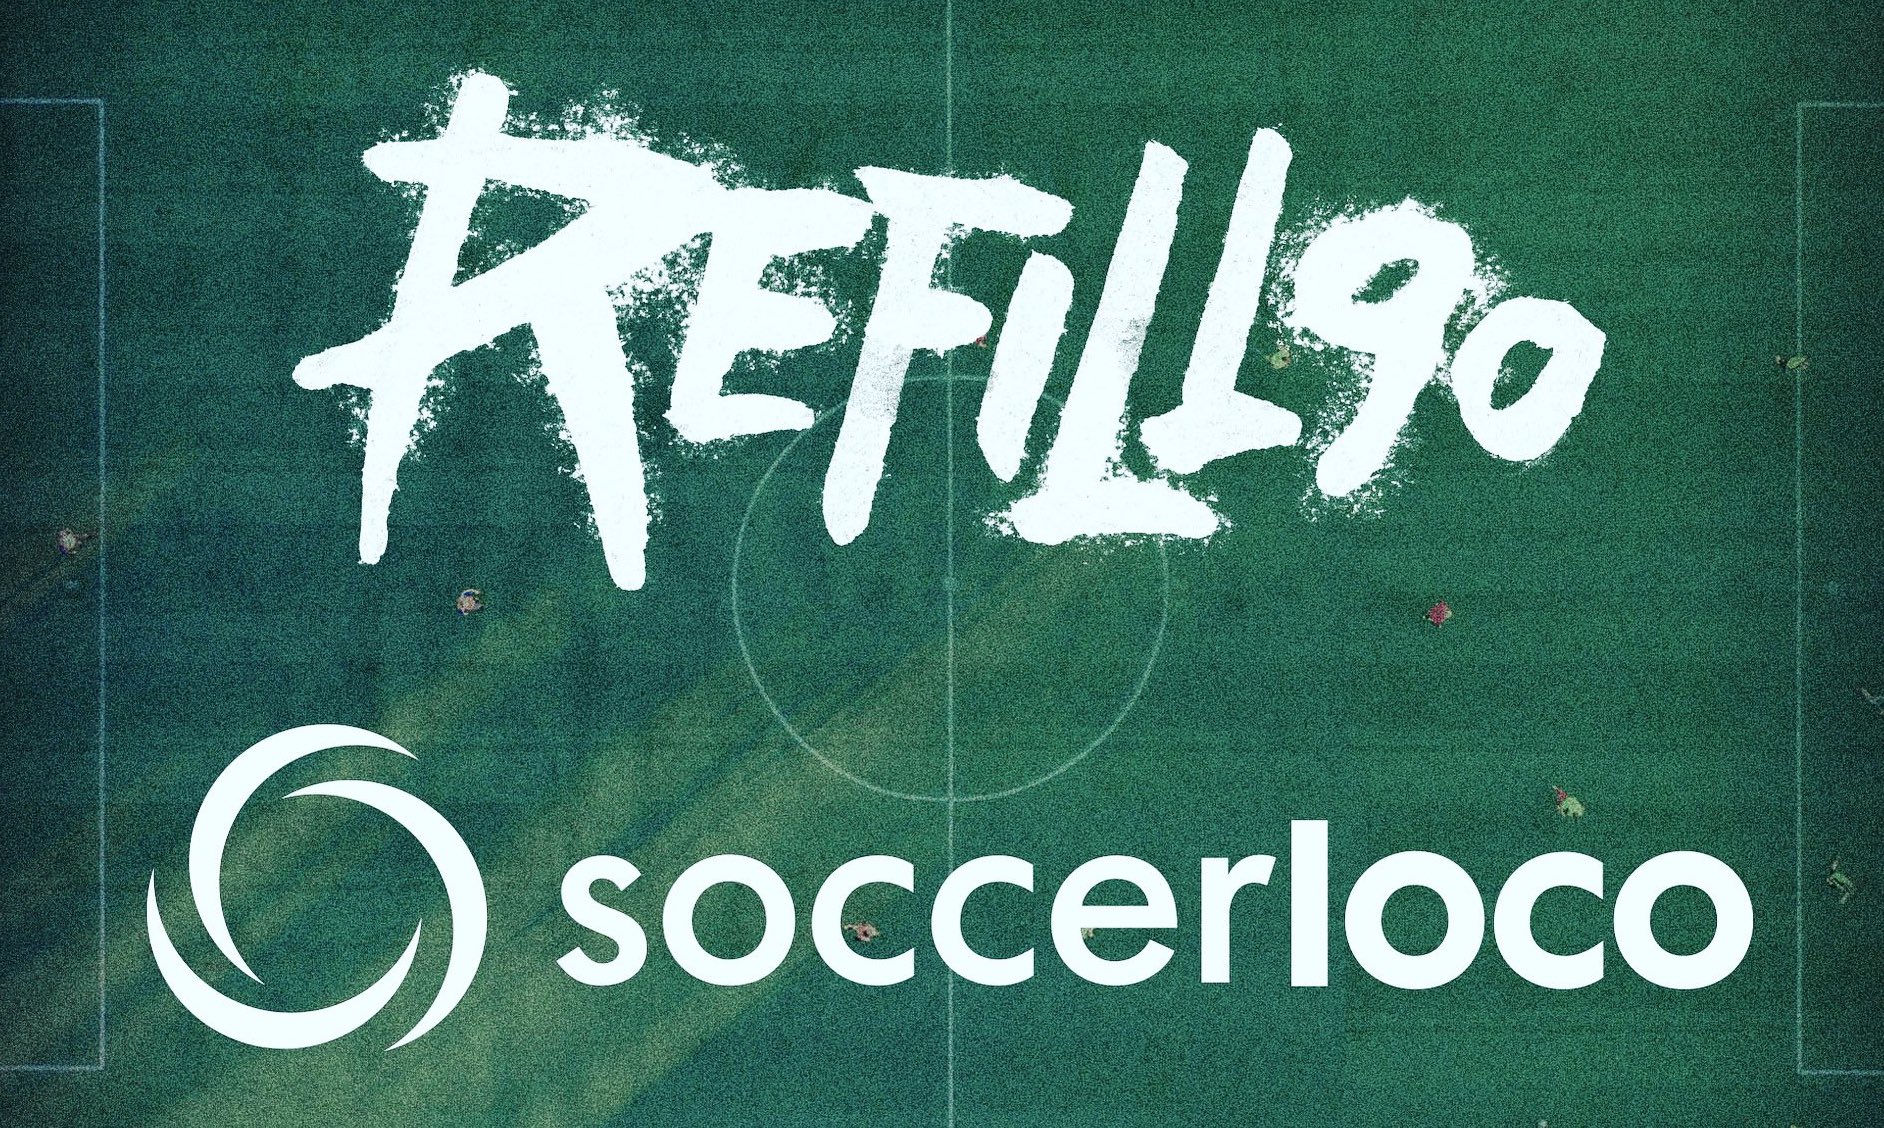 Soccerloco partners with Refill90 as Official Sustainability Partner to #ProtectThePitch